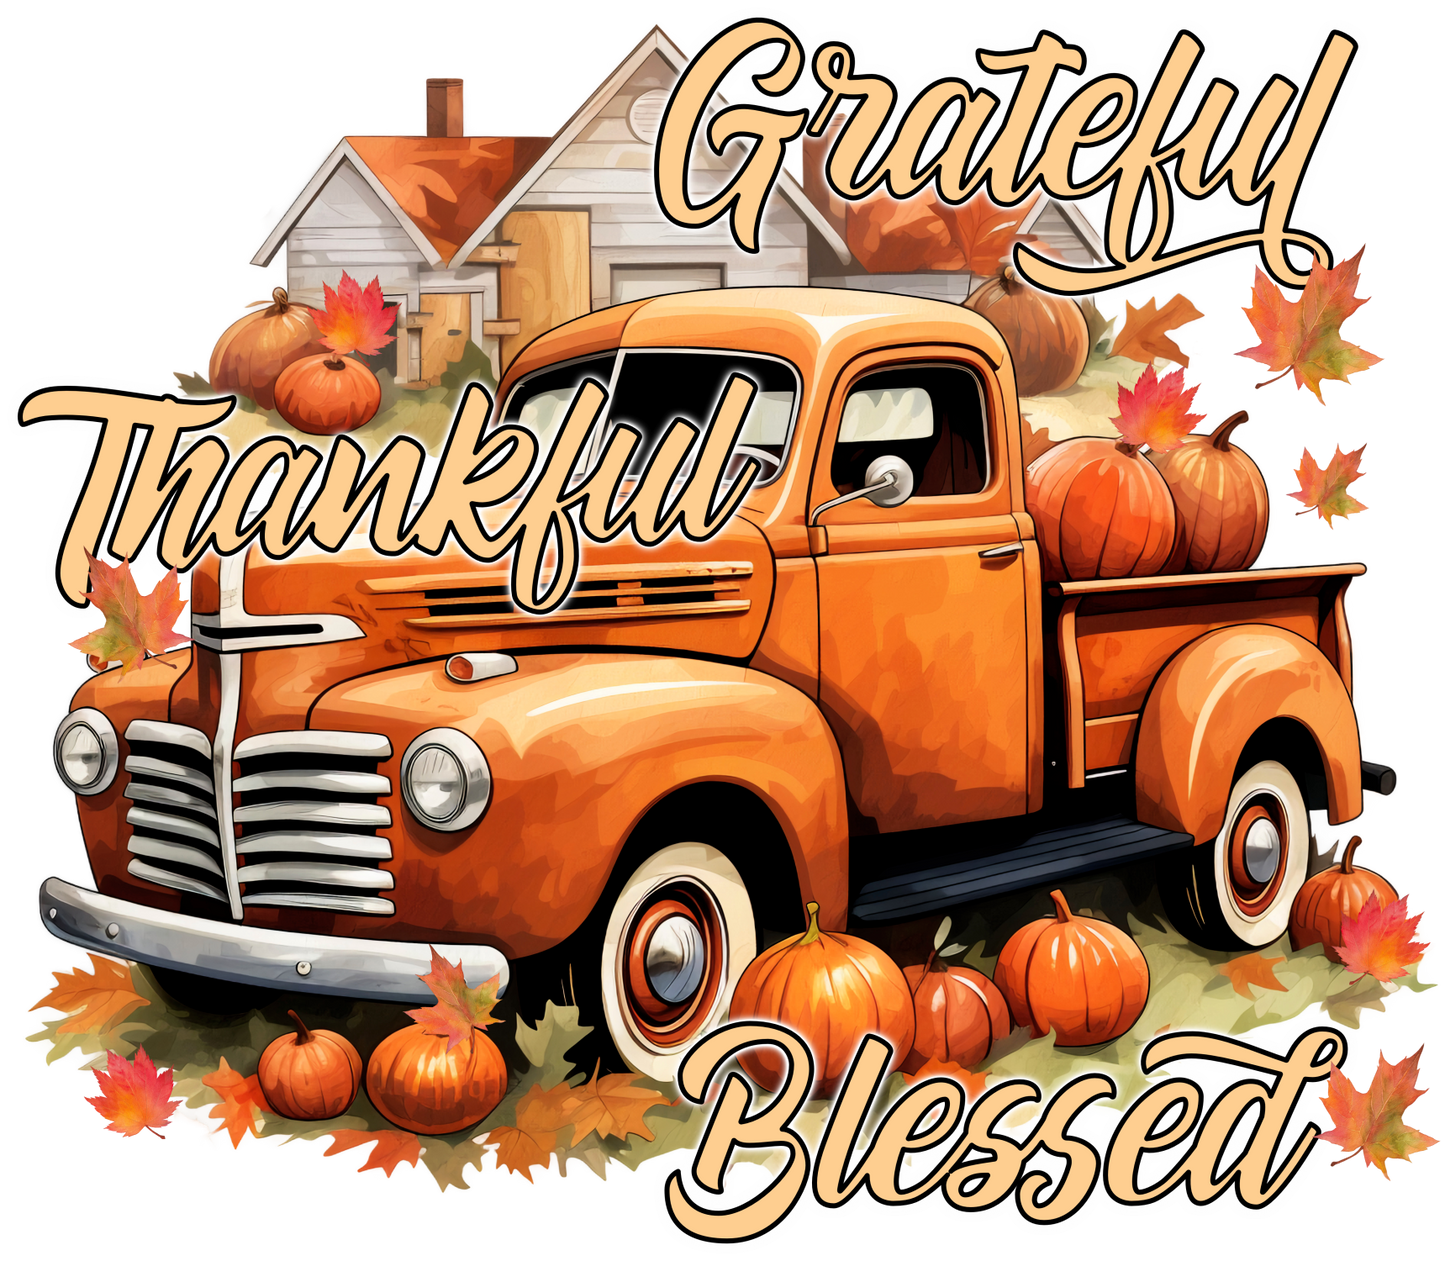 FALL PRINT 26 - Grateful Thankful Blessed Vintage Truck